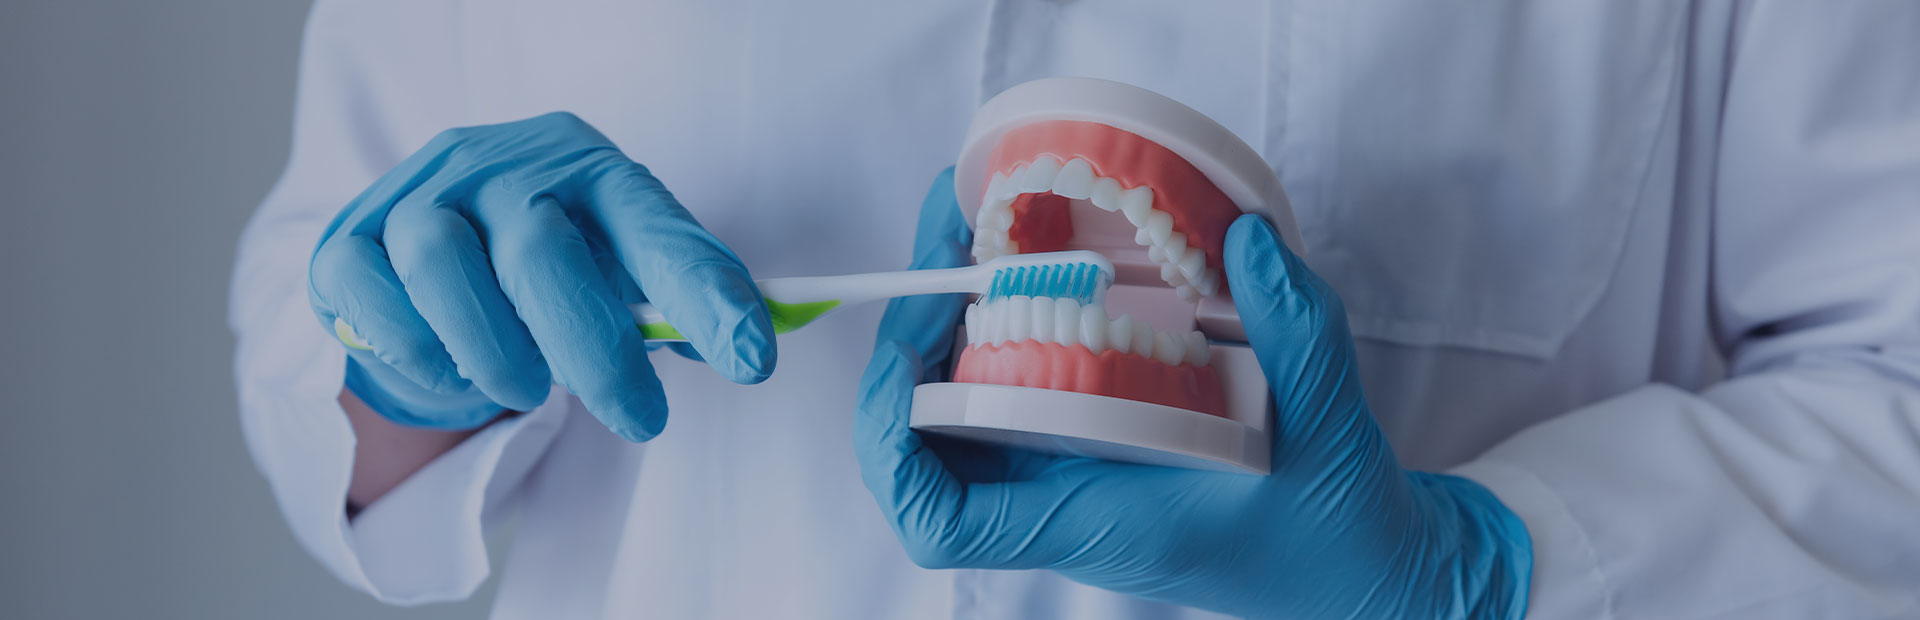 A close up of a set of dentures being held by a dental technician, demonstrating how to brush dentures before instructing on how to use Fixodent denture adhesive. 